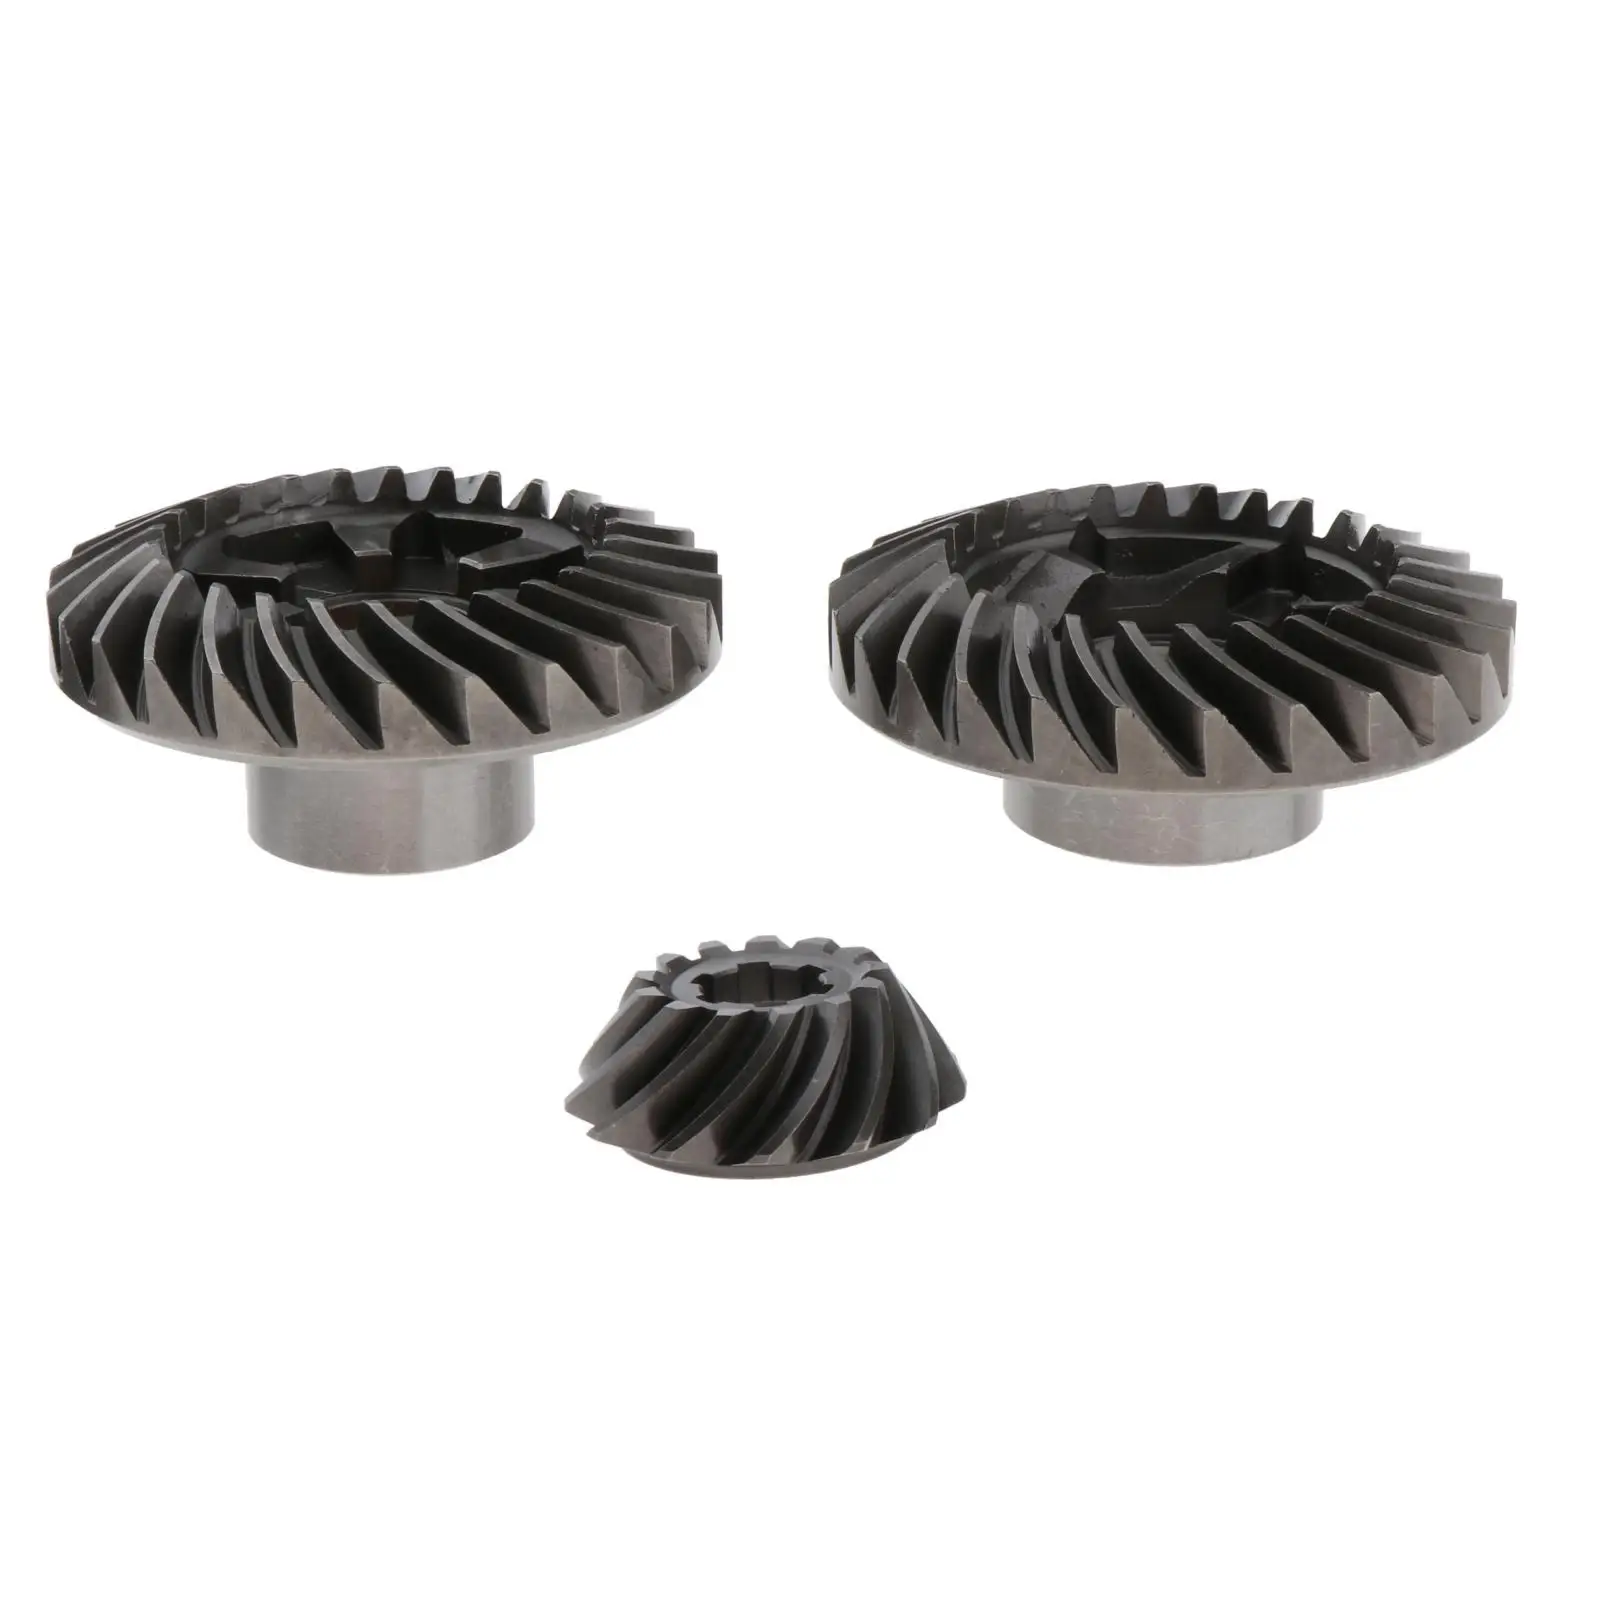 3 Gear Kits Forward Pinion Replacement Fit for  40HP